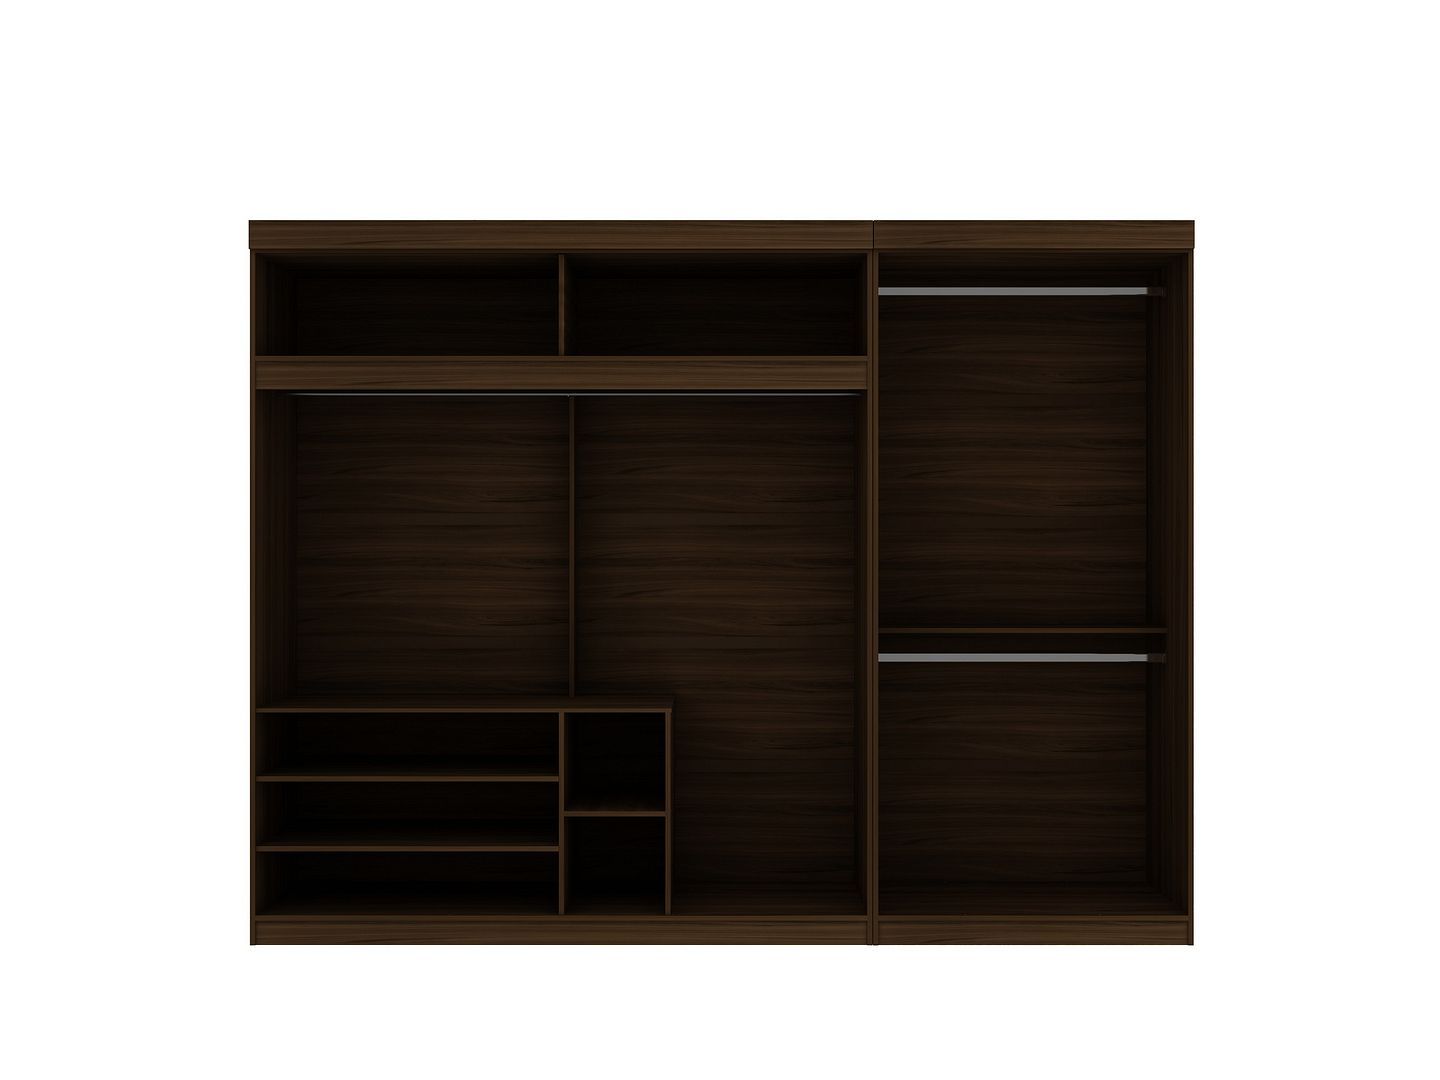 Mulberry 2-Sectional Open Hanging Closet Module Wardrobe System - East Shore Modern Home Furnishings